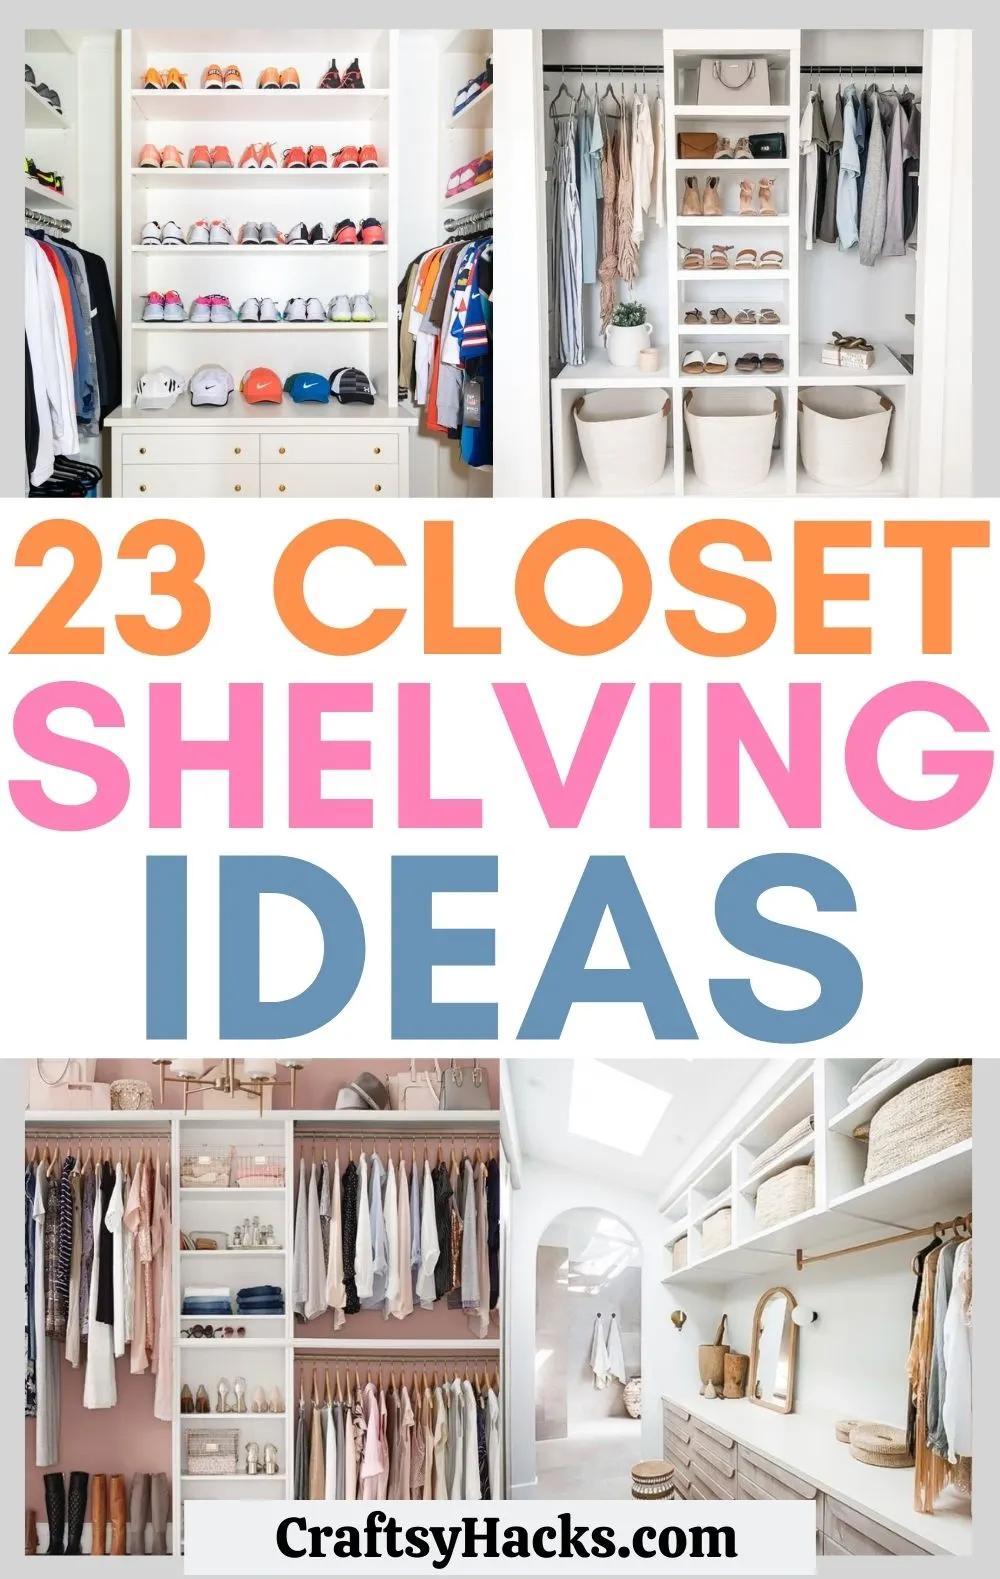 23 Closet Shelving Ideas To Up Your, Cupboard Shelving Ideas